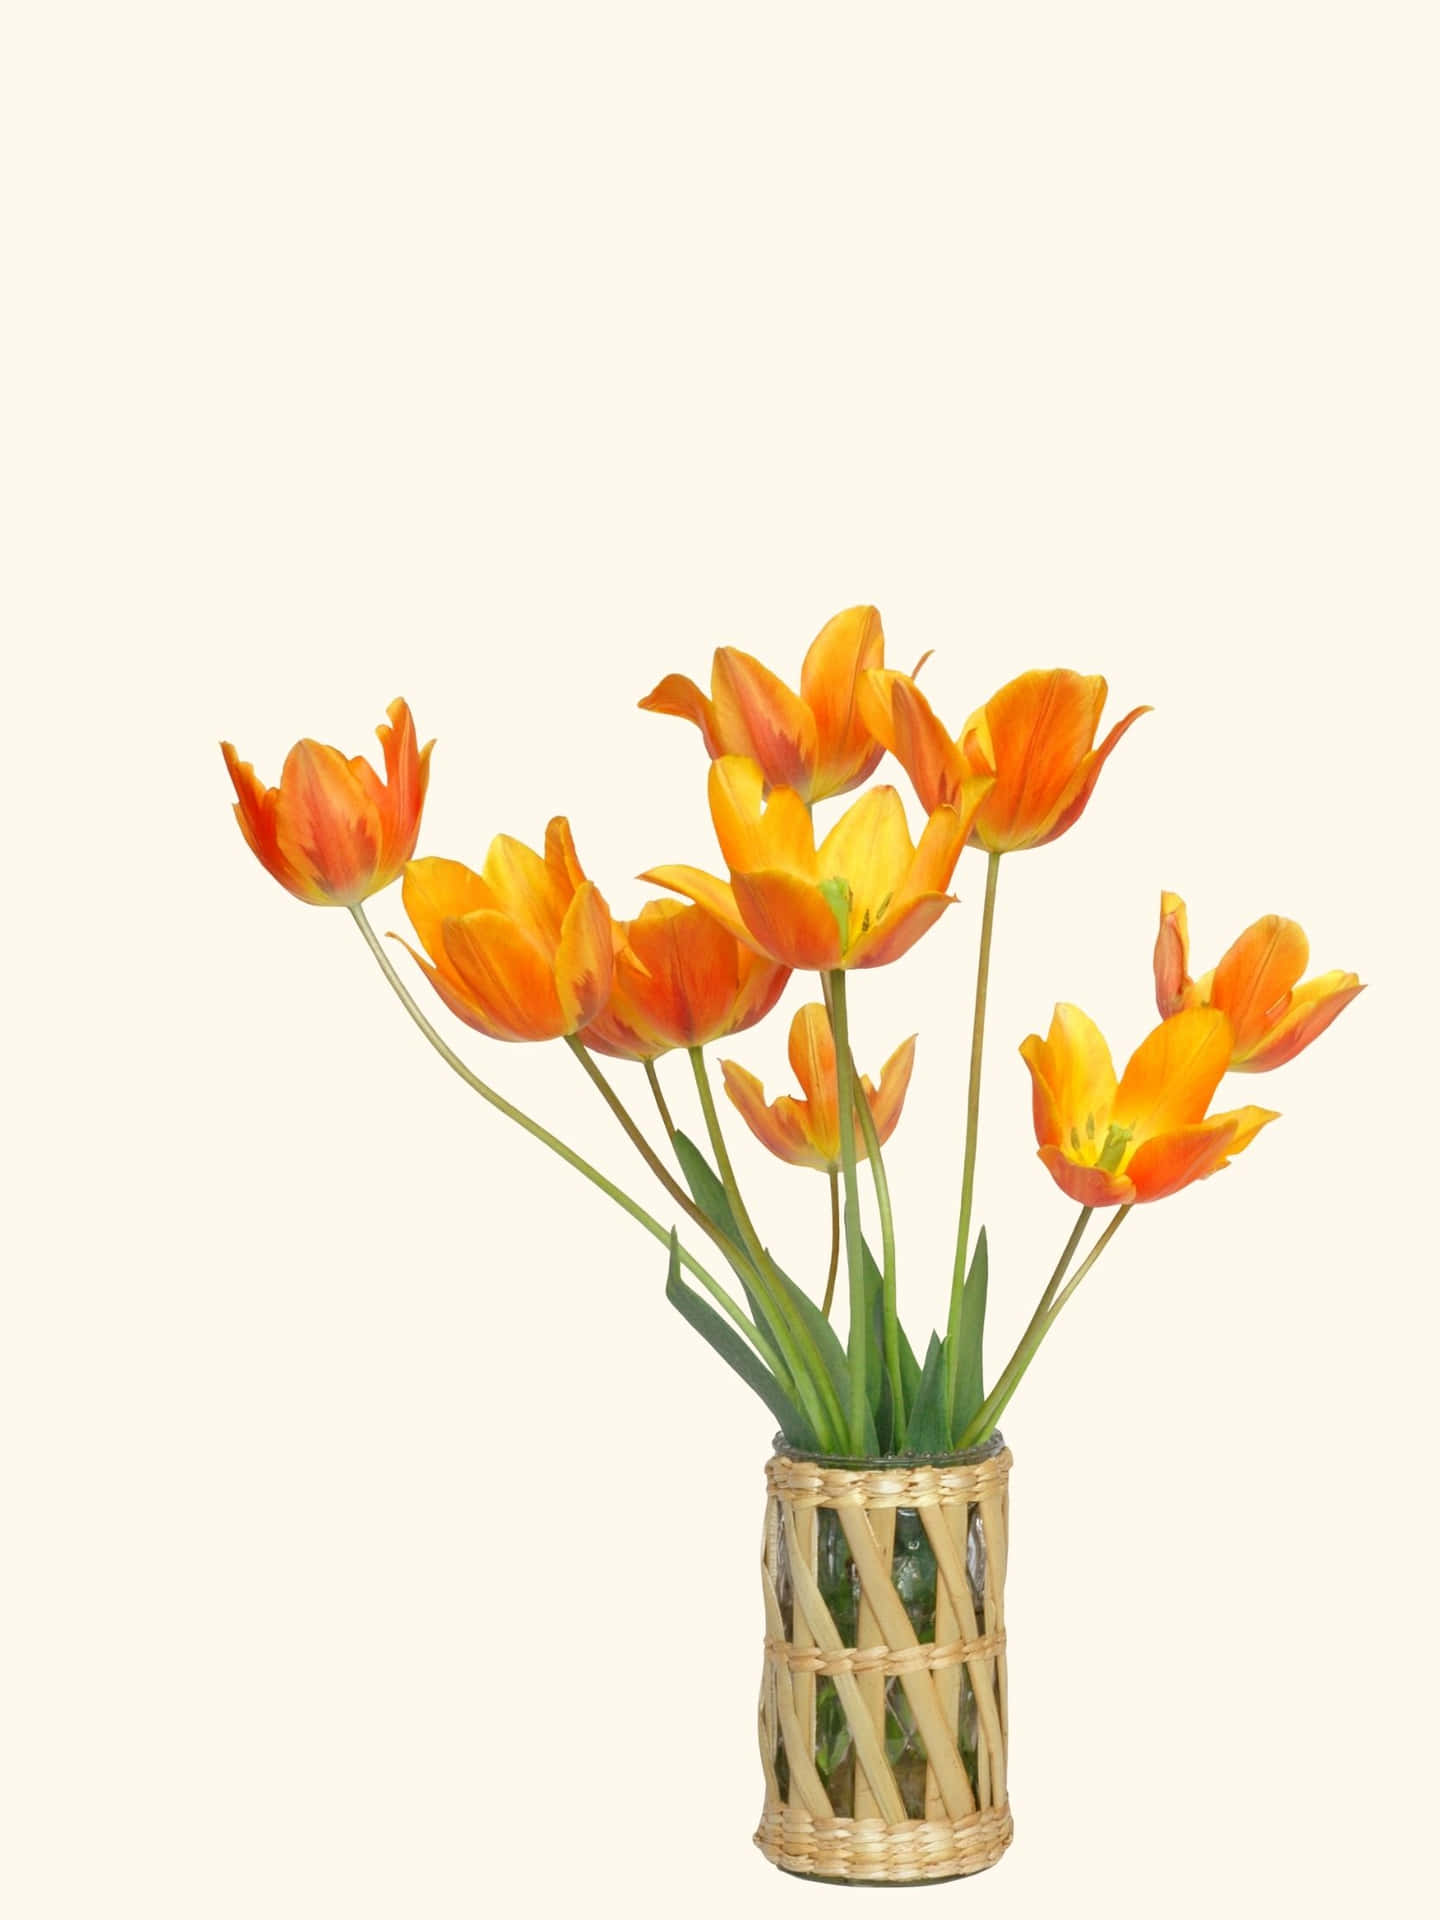 A Vase With Orange Flowers Wallpaper